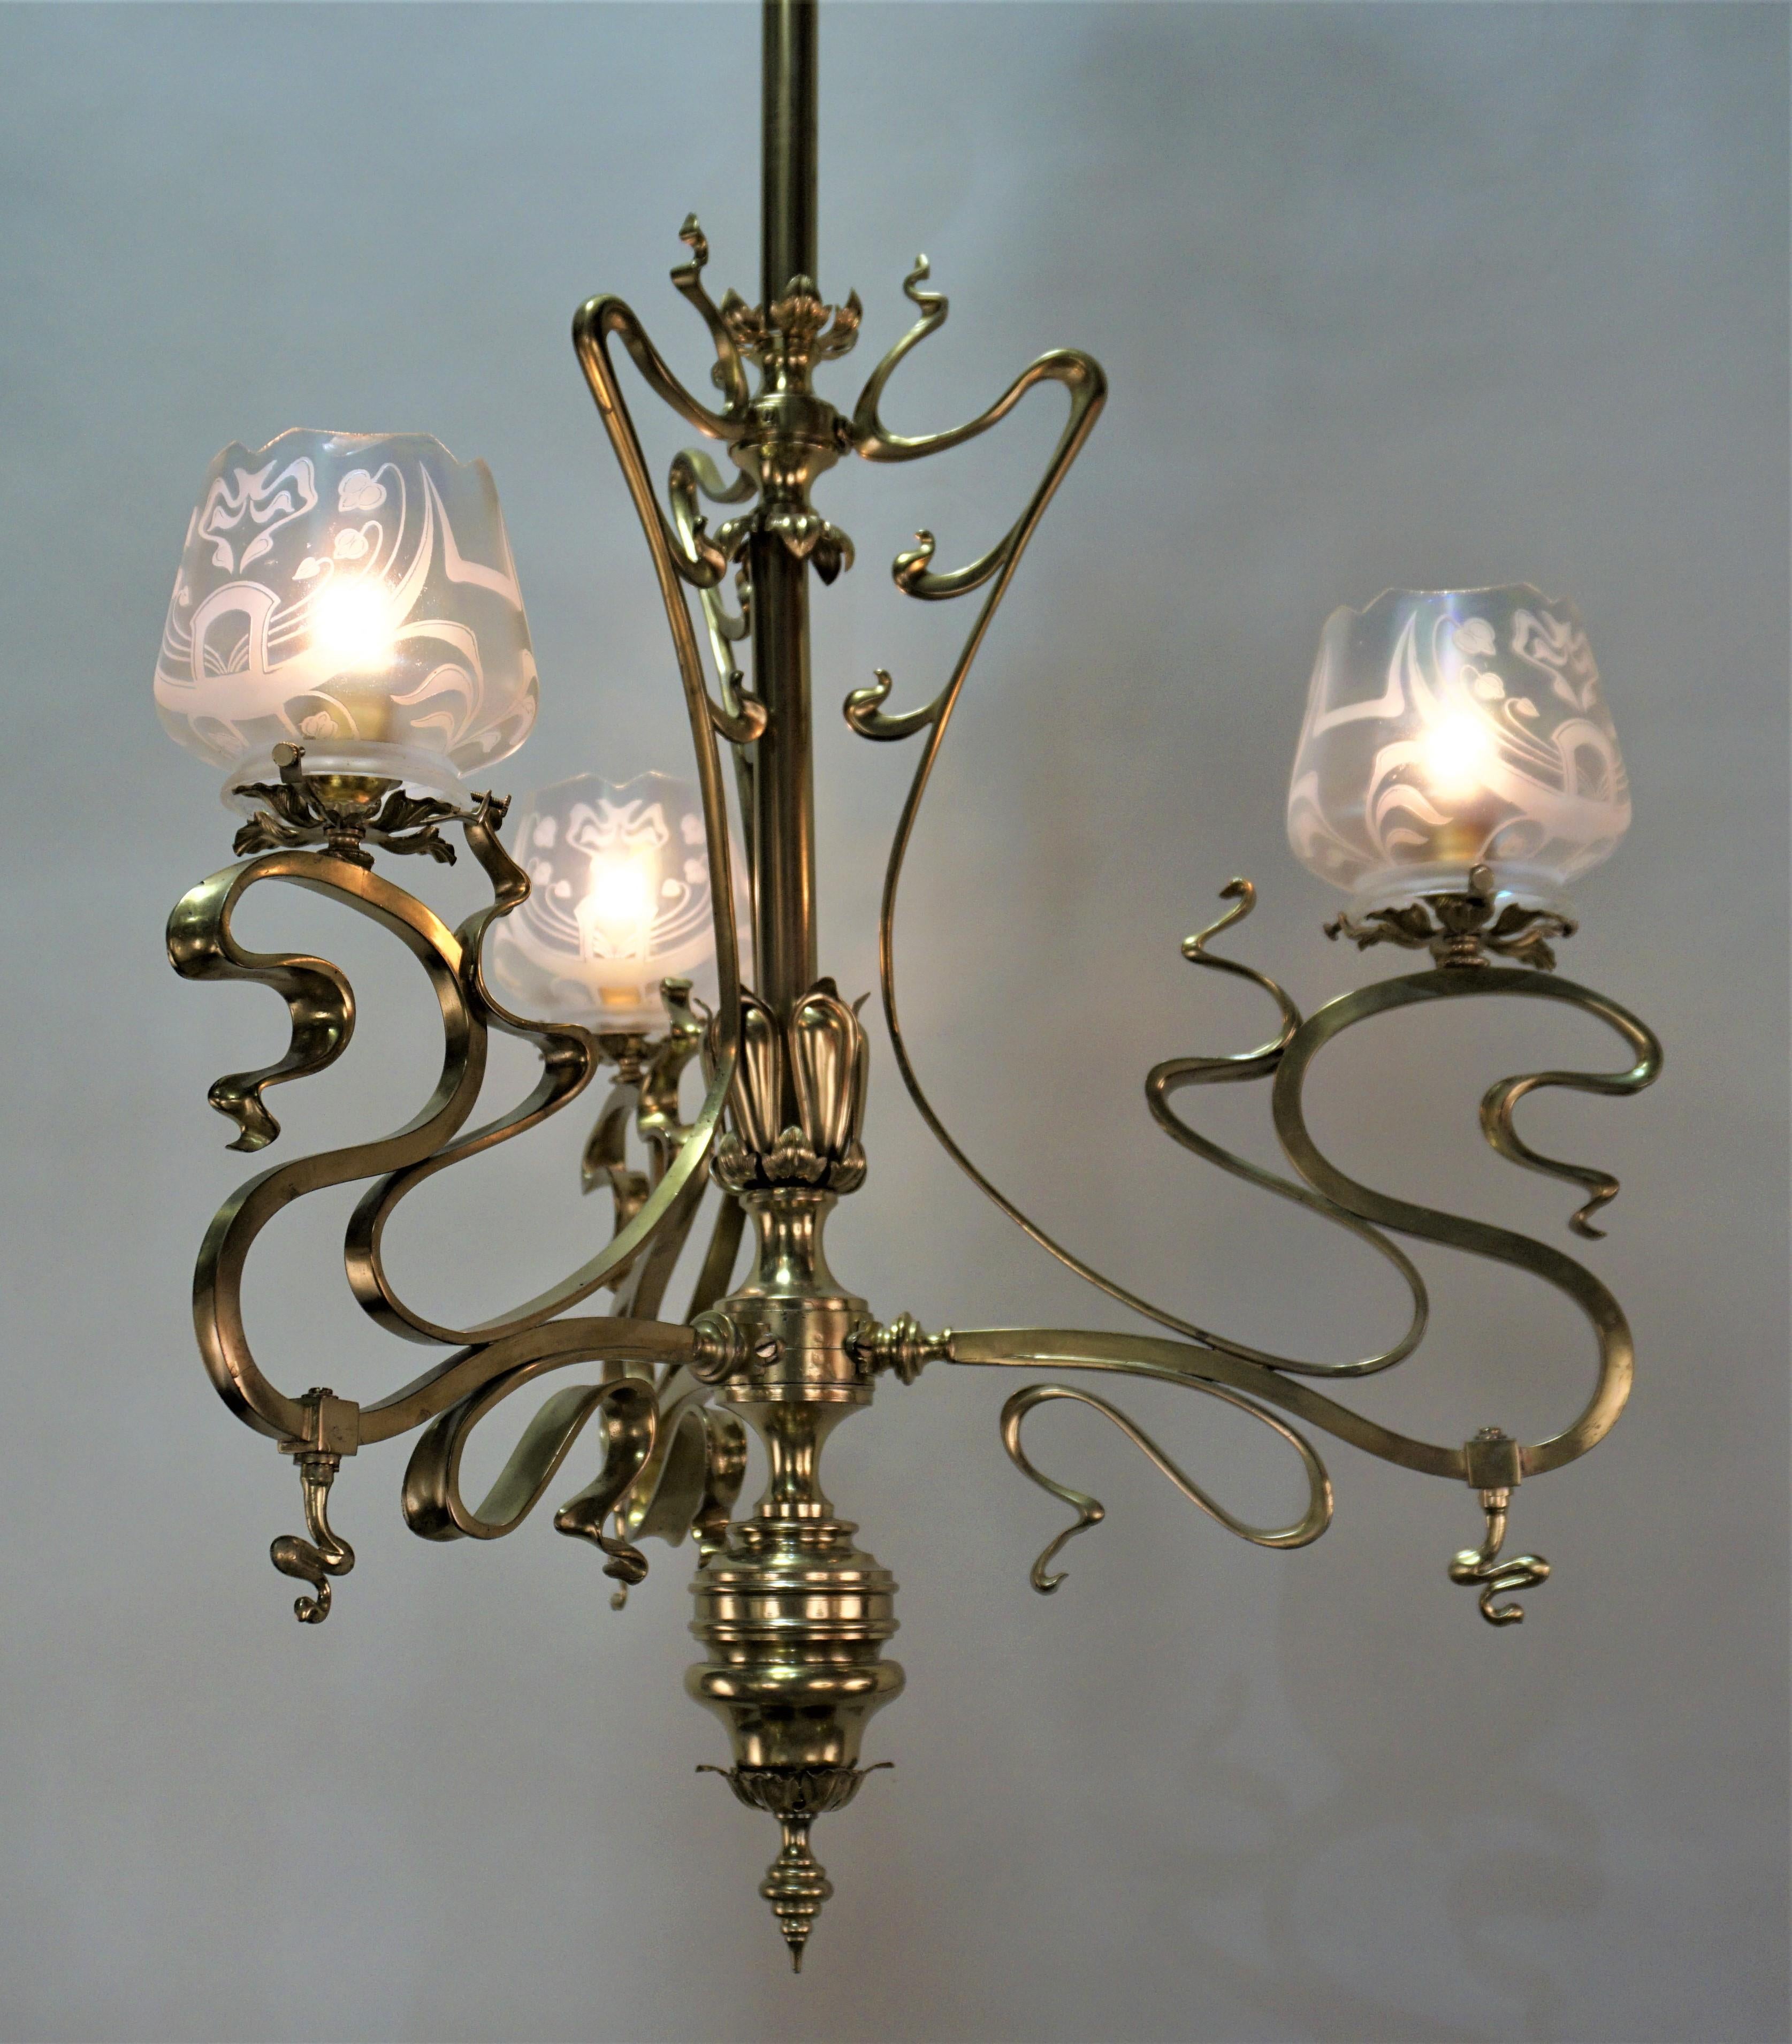 Three-arm 19th century Art Nouveau gas chandelier that has been electrified. This elegant chandelier is satin bronze with hand acid etched glass shades.
Height can be adjusted by cutting the centre tubing.